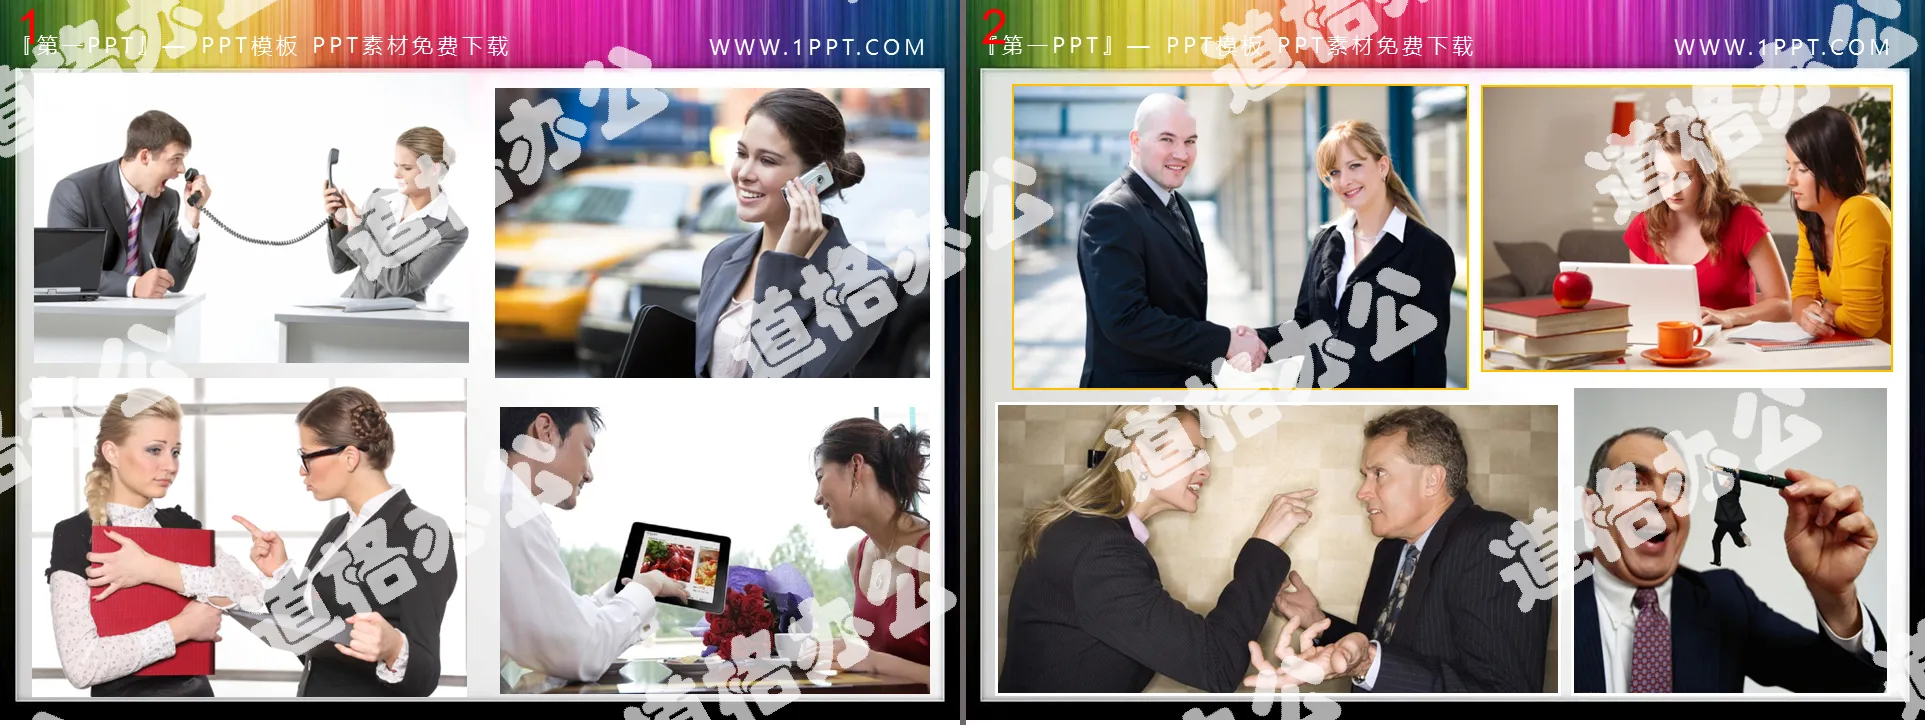 Eight PPT illustration materials related to business communication and cooperation